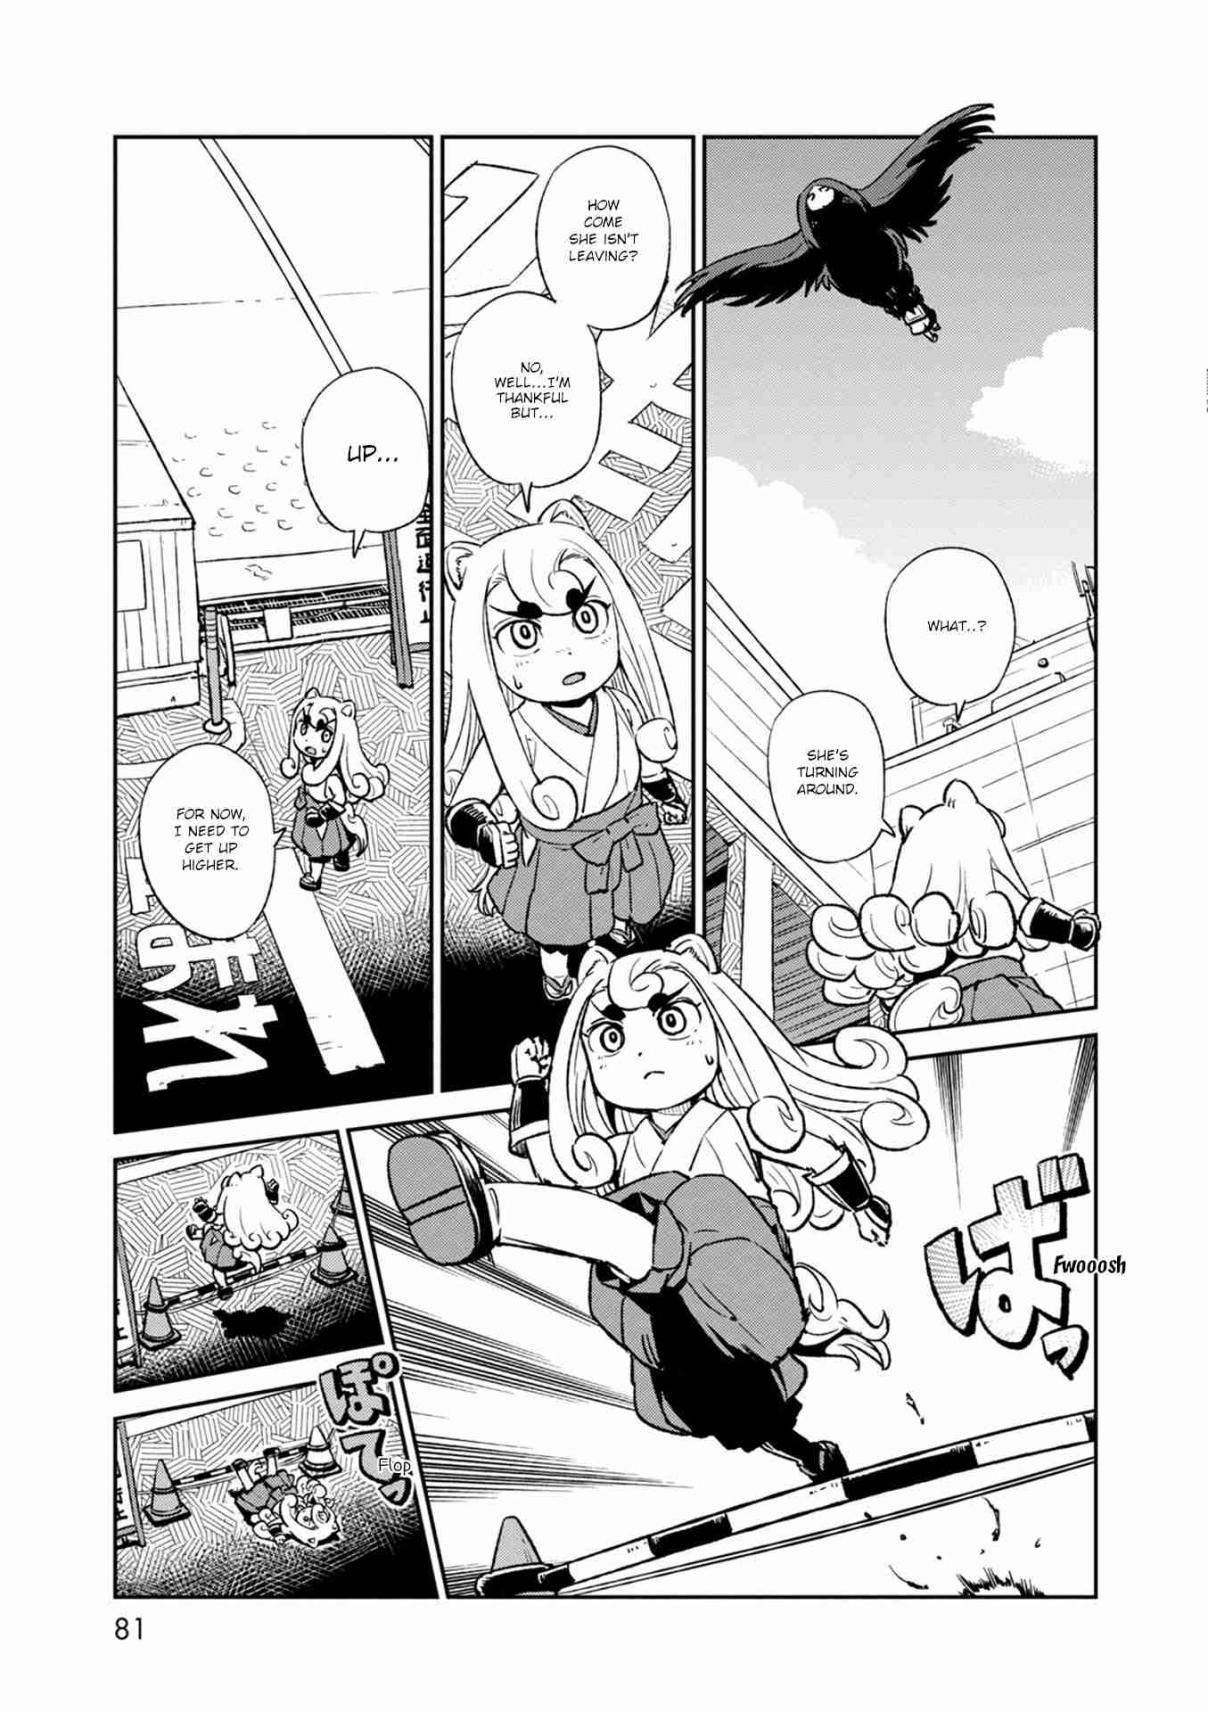 Neko Musume Michikusa Nikki Vol. 19 Ch. 116 Passing the Time with Sprinting Youkai at the Mall